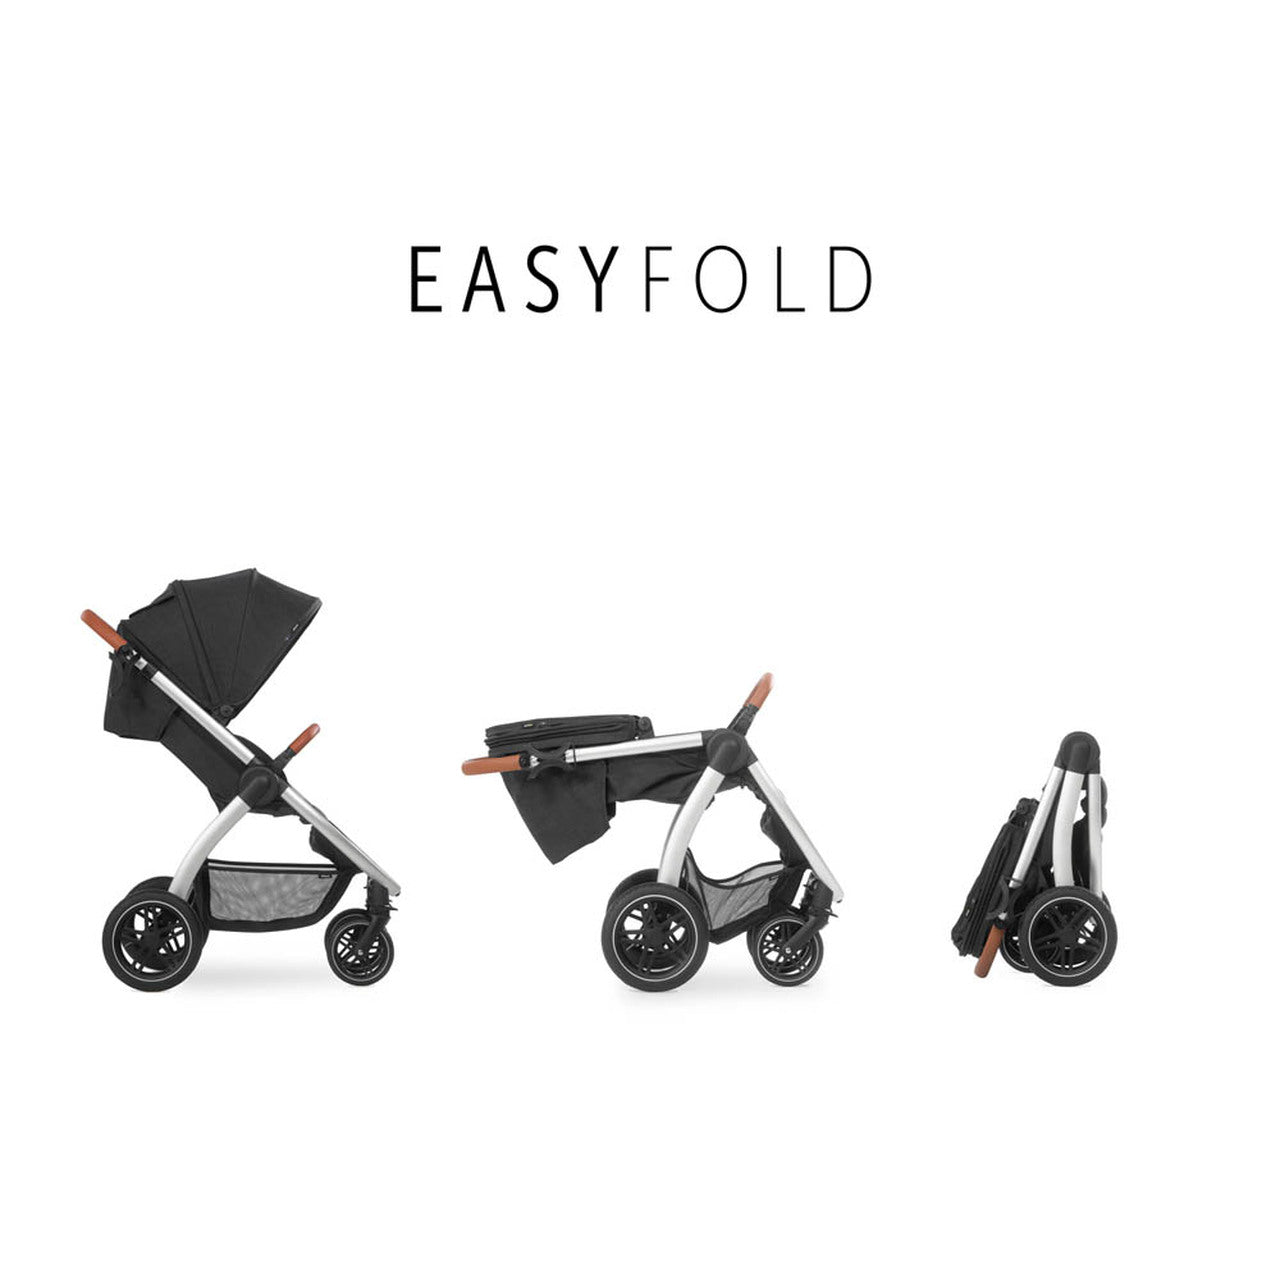 Hauck Uptown stroller reviews, questions, dimensions